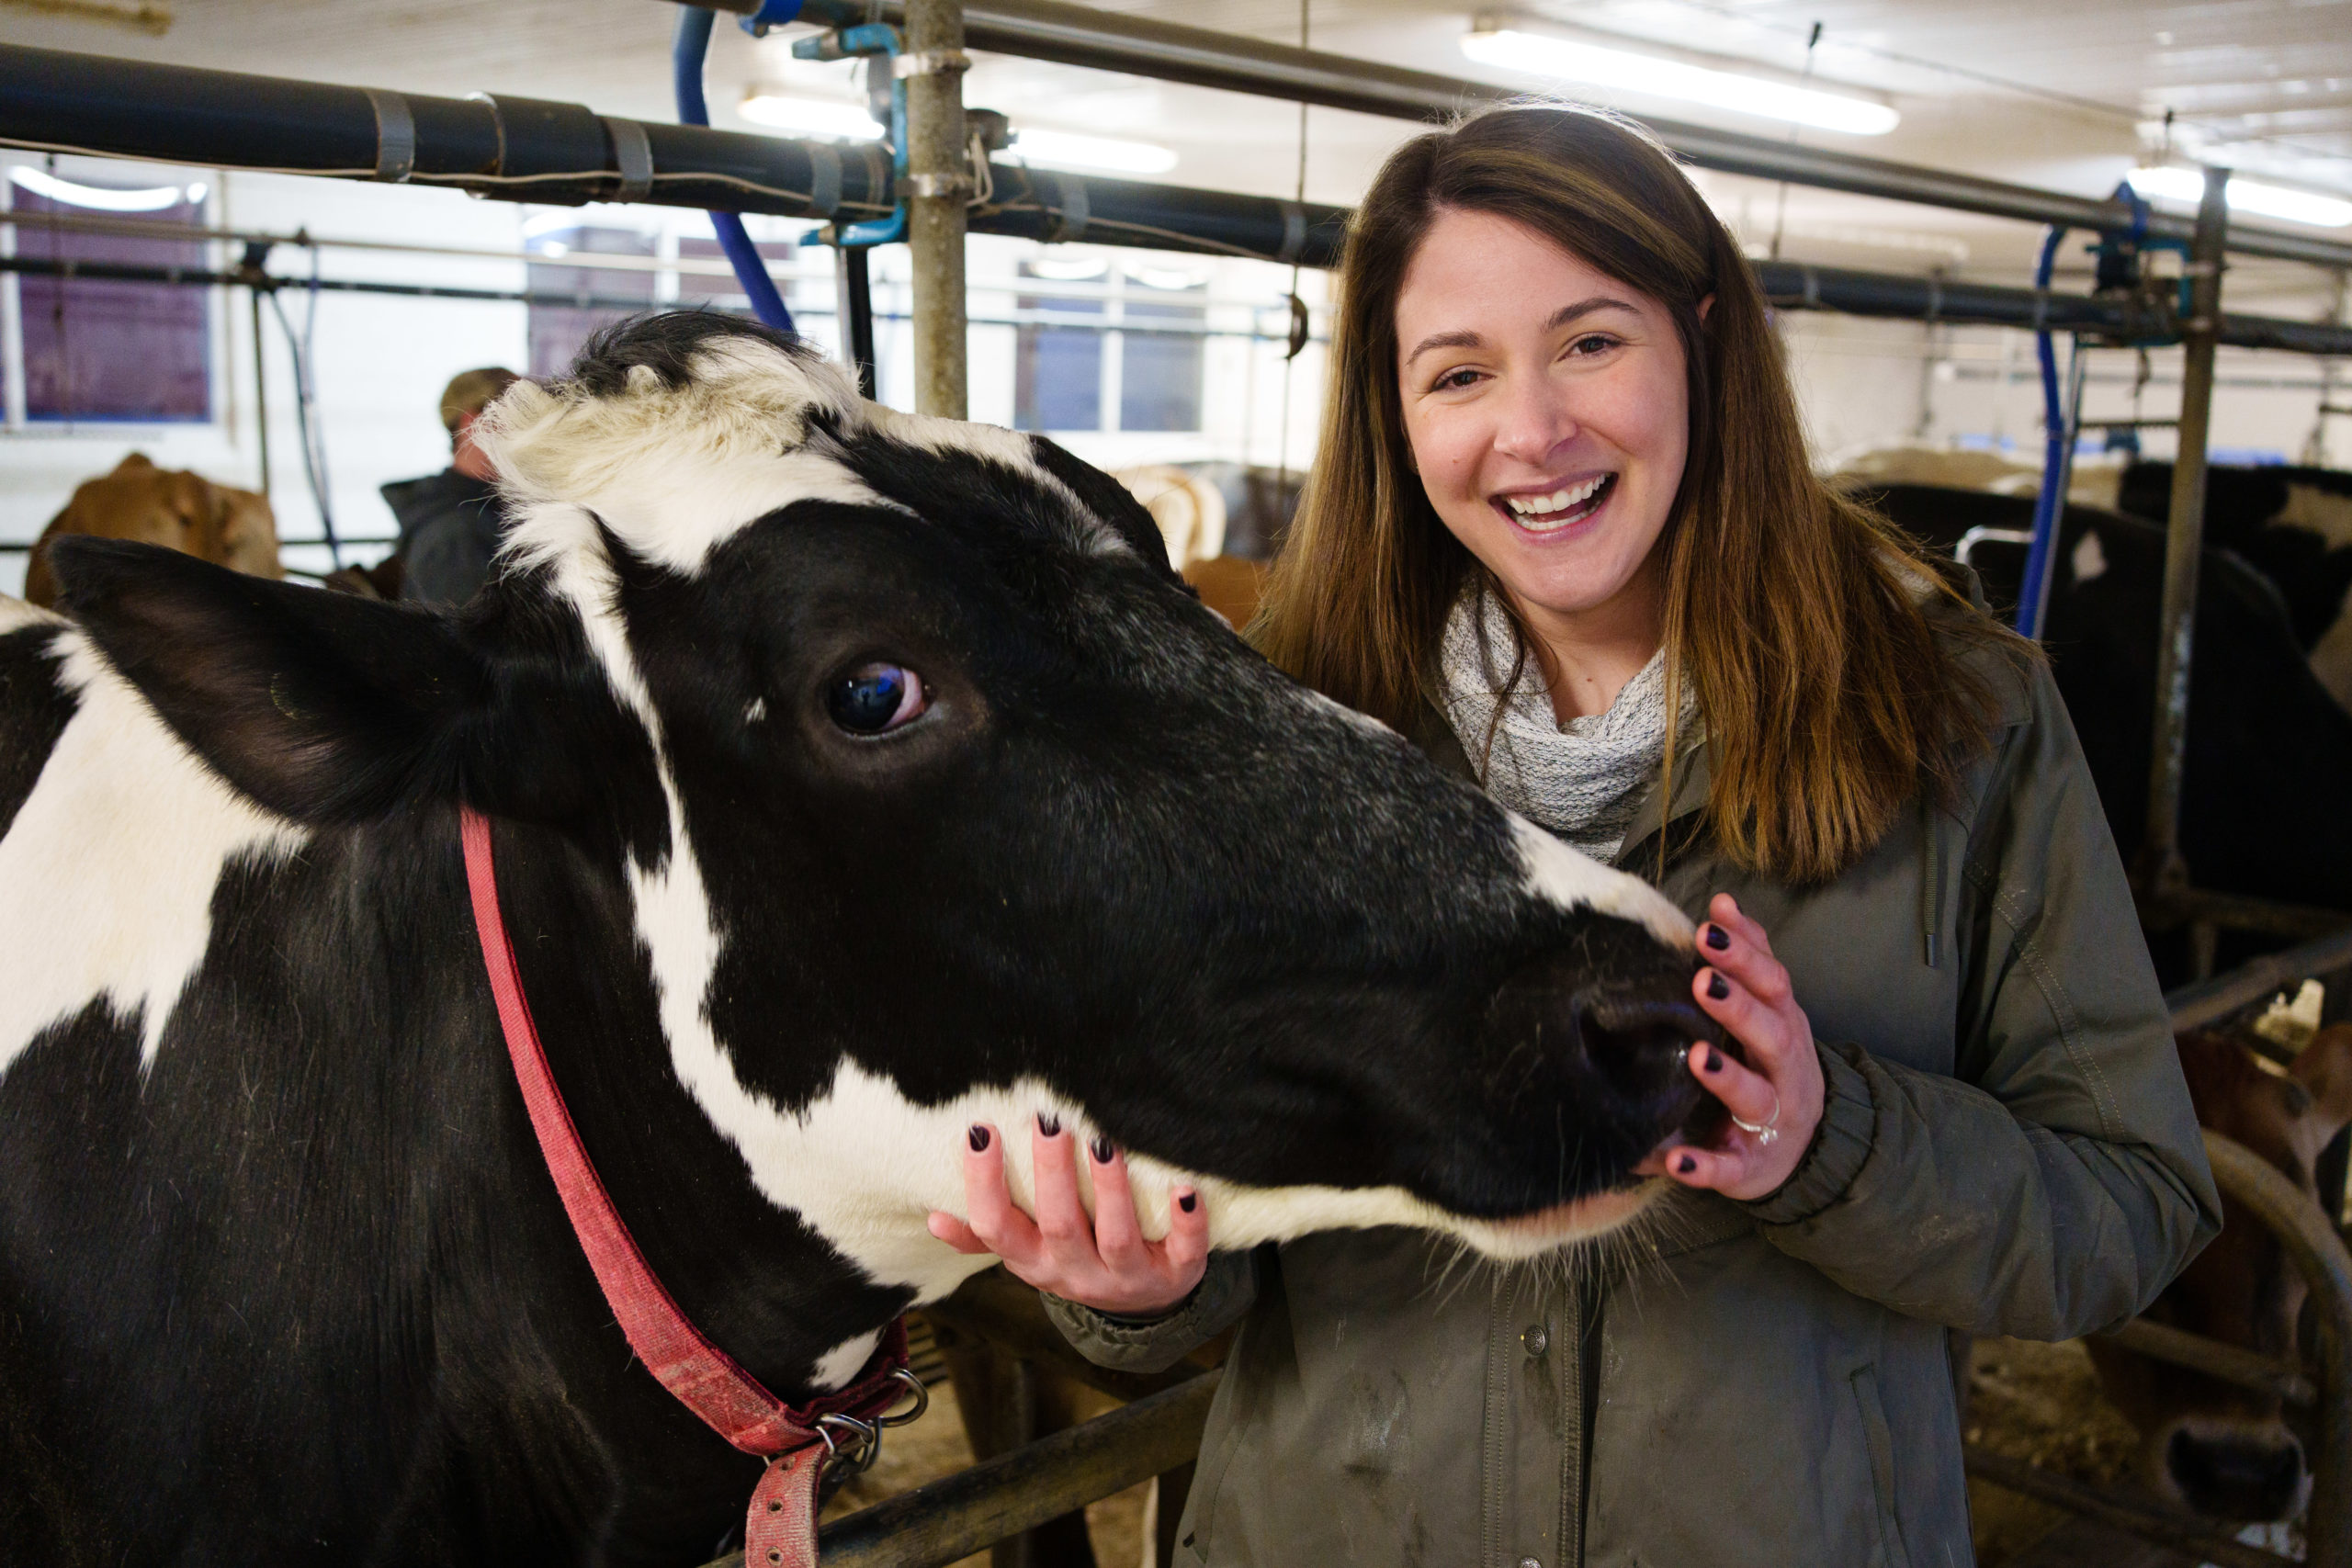 Students Can Visit a New Jersey Dairy Farm Without Leaving Their Classroom